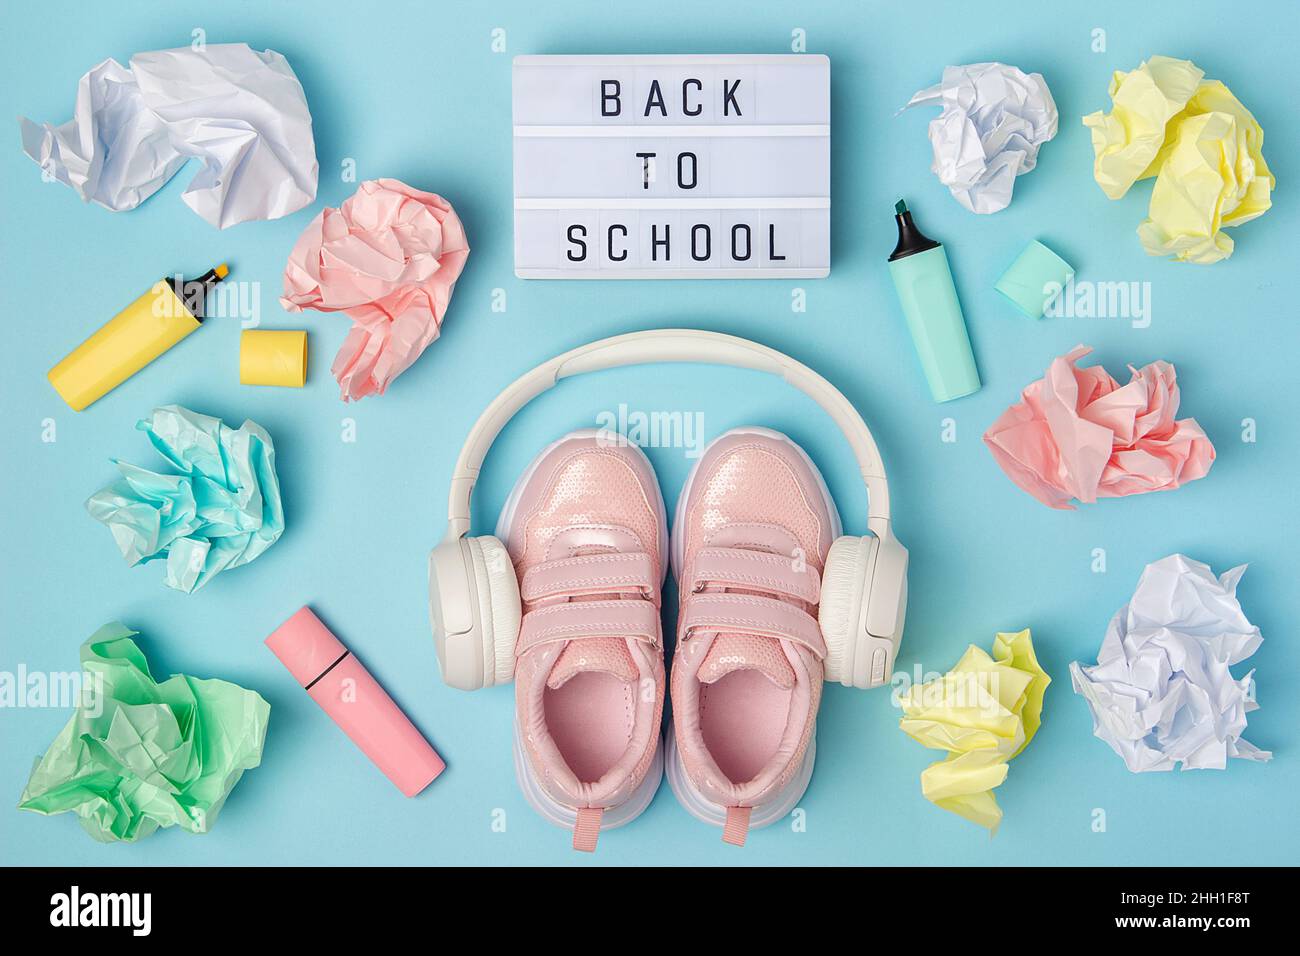 Back to school text on lightbox. Headphones, pink shoes, colored crumpled paper balls, marker on blue background. Education concept. Flatlay Top view Stock Photo